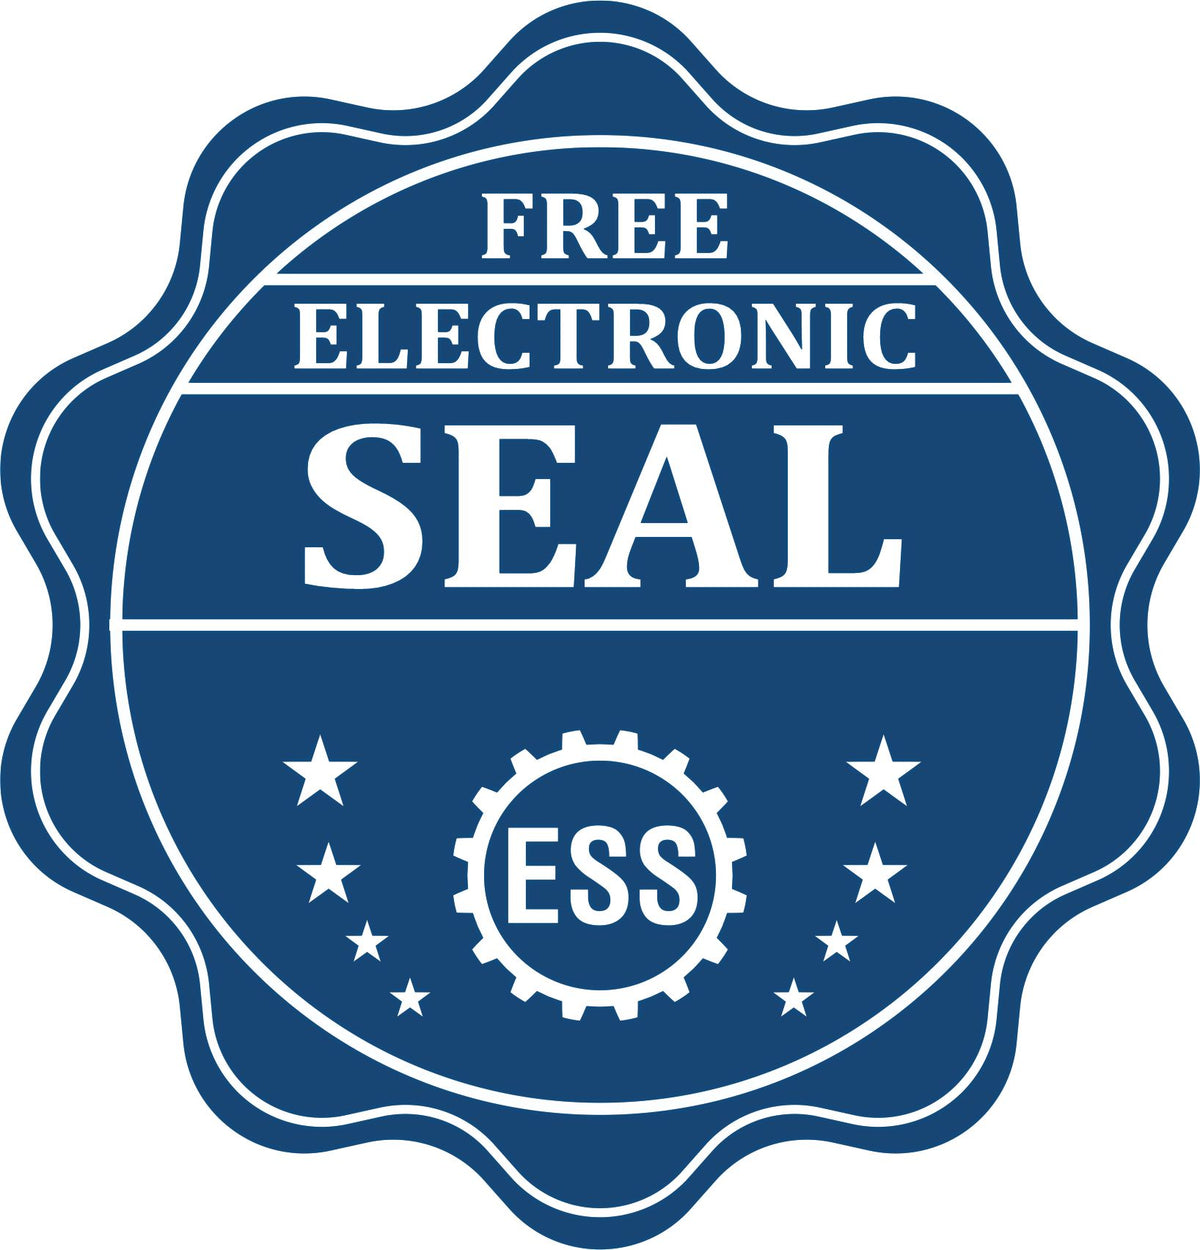 A badge showing a free electronic seal for the Long Reach Tennessee PE Seal with stars and the ESS gear on the emblem.